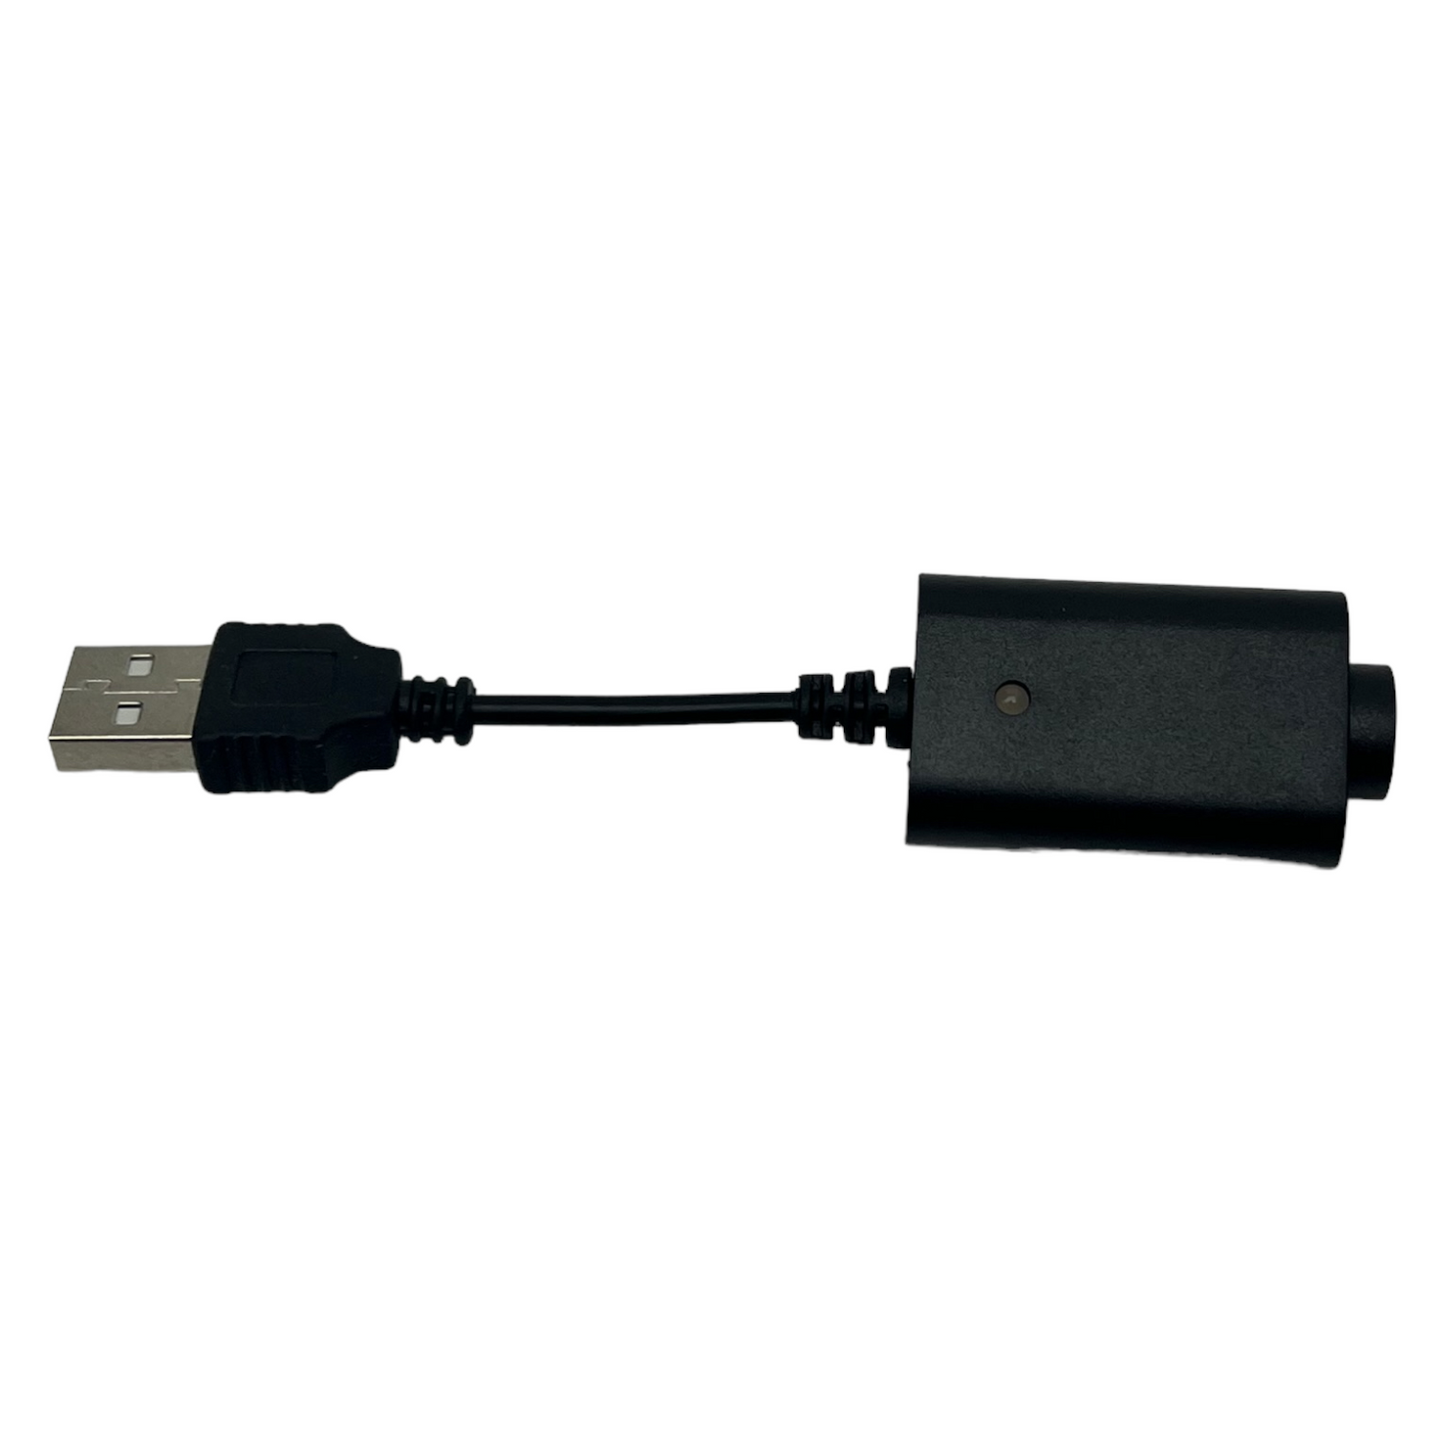 Smart 510 USB Charger